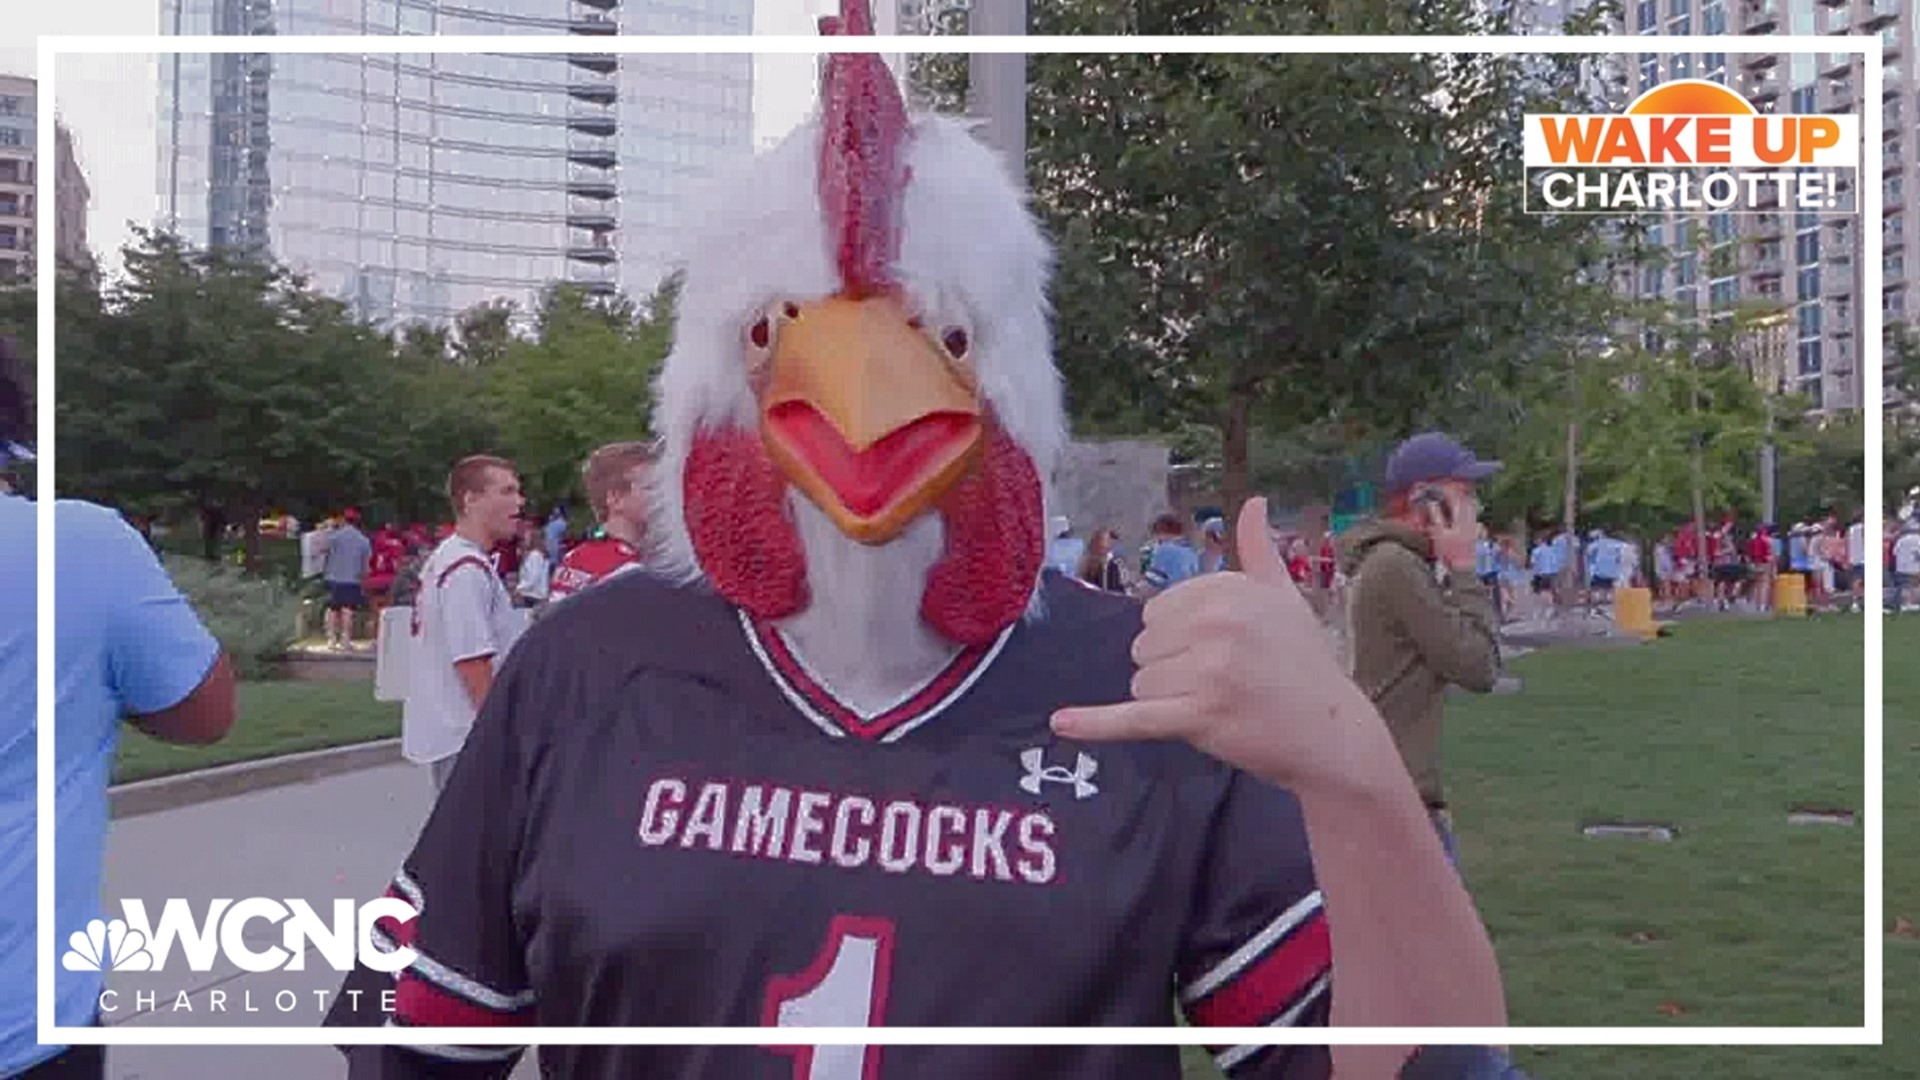 Will it be the Tar Heels? Will it be the Gamecocks? Who knows. But it will be one exciting Saturday with thousands of football fans in Uptown Charlotte.